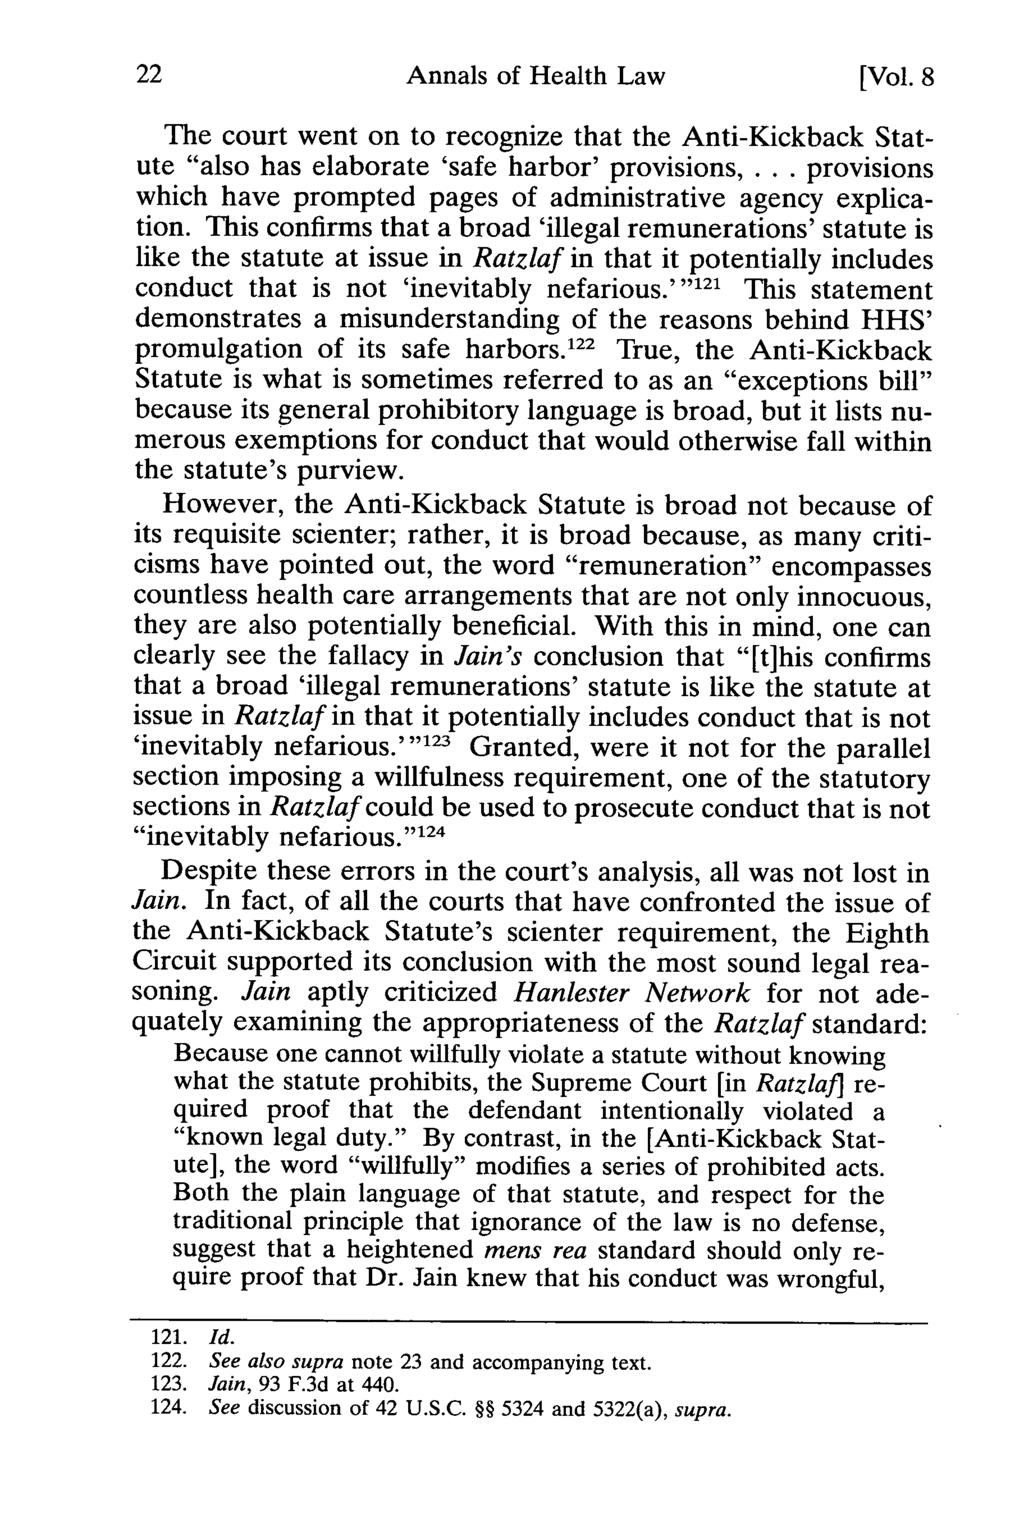 Annals of Health Law, Vol. 8 [1999], Iss. 1, Art. 2 Annals of Health Law [Vol. 8 The court went on to recognize that the Anti-Kickback Statute "also has elaborate 'safe harbor' provisions,.